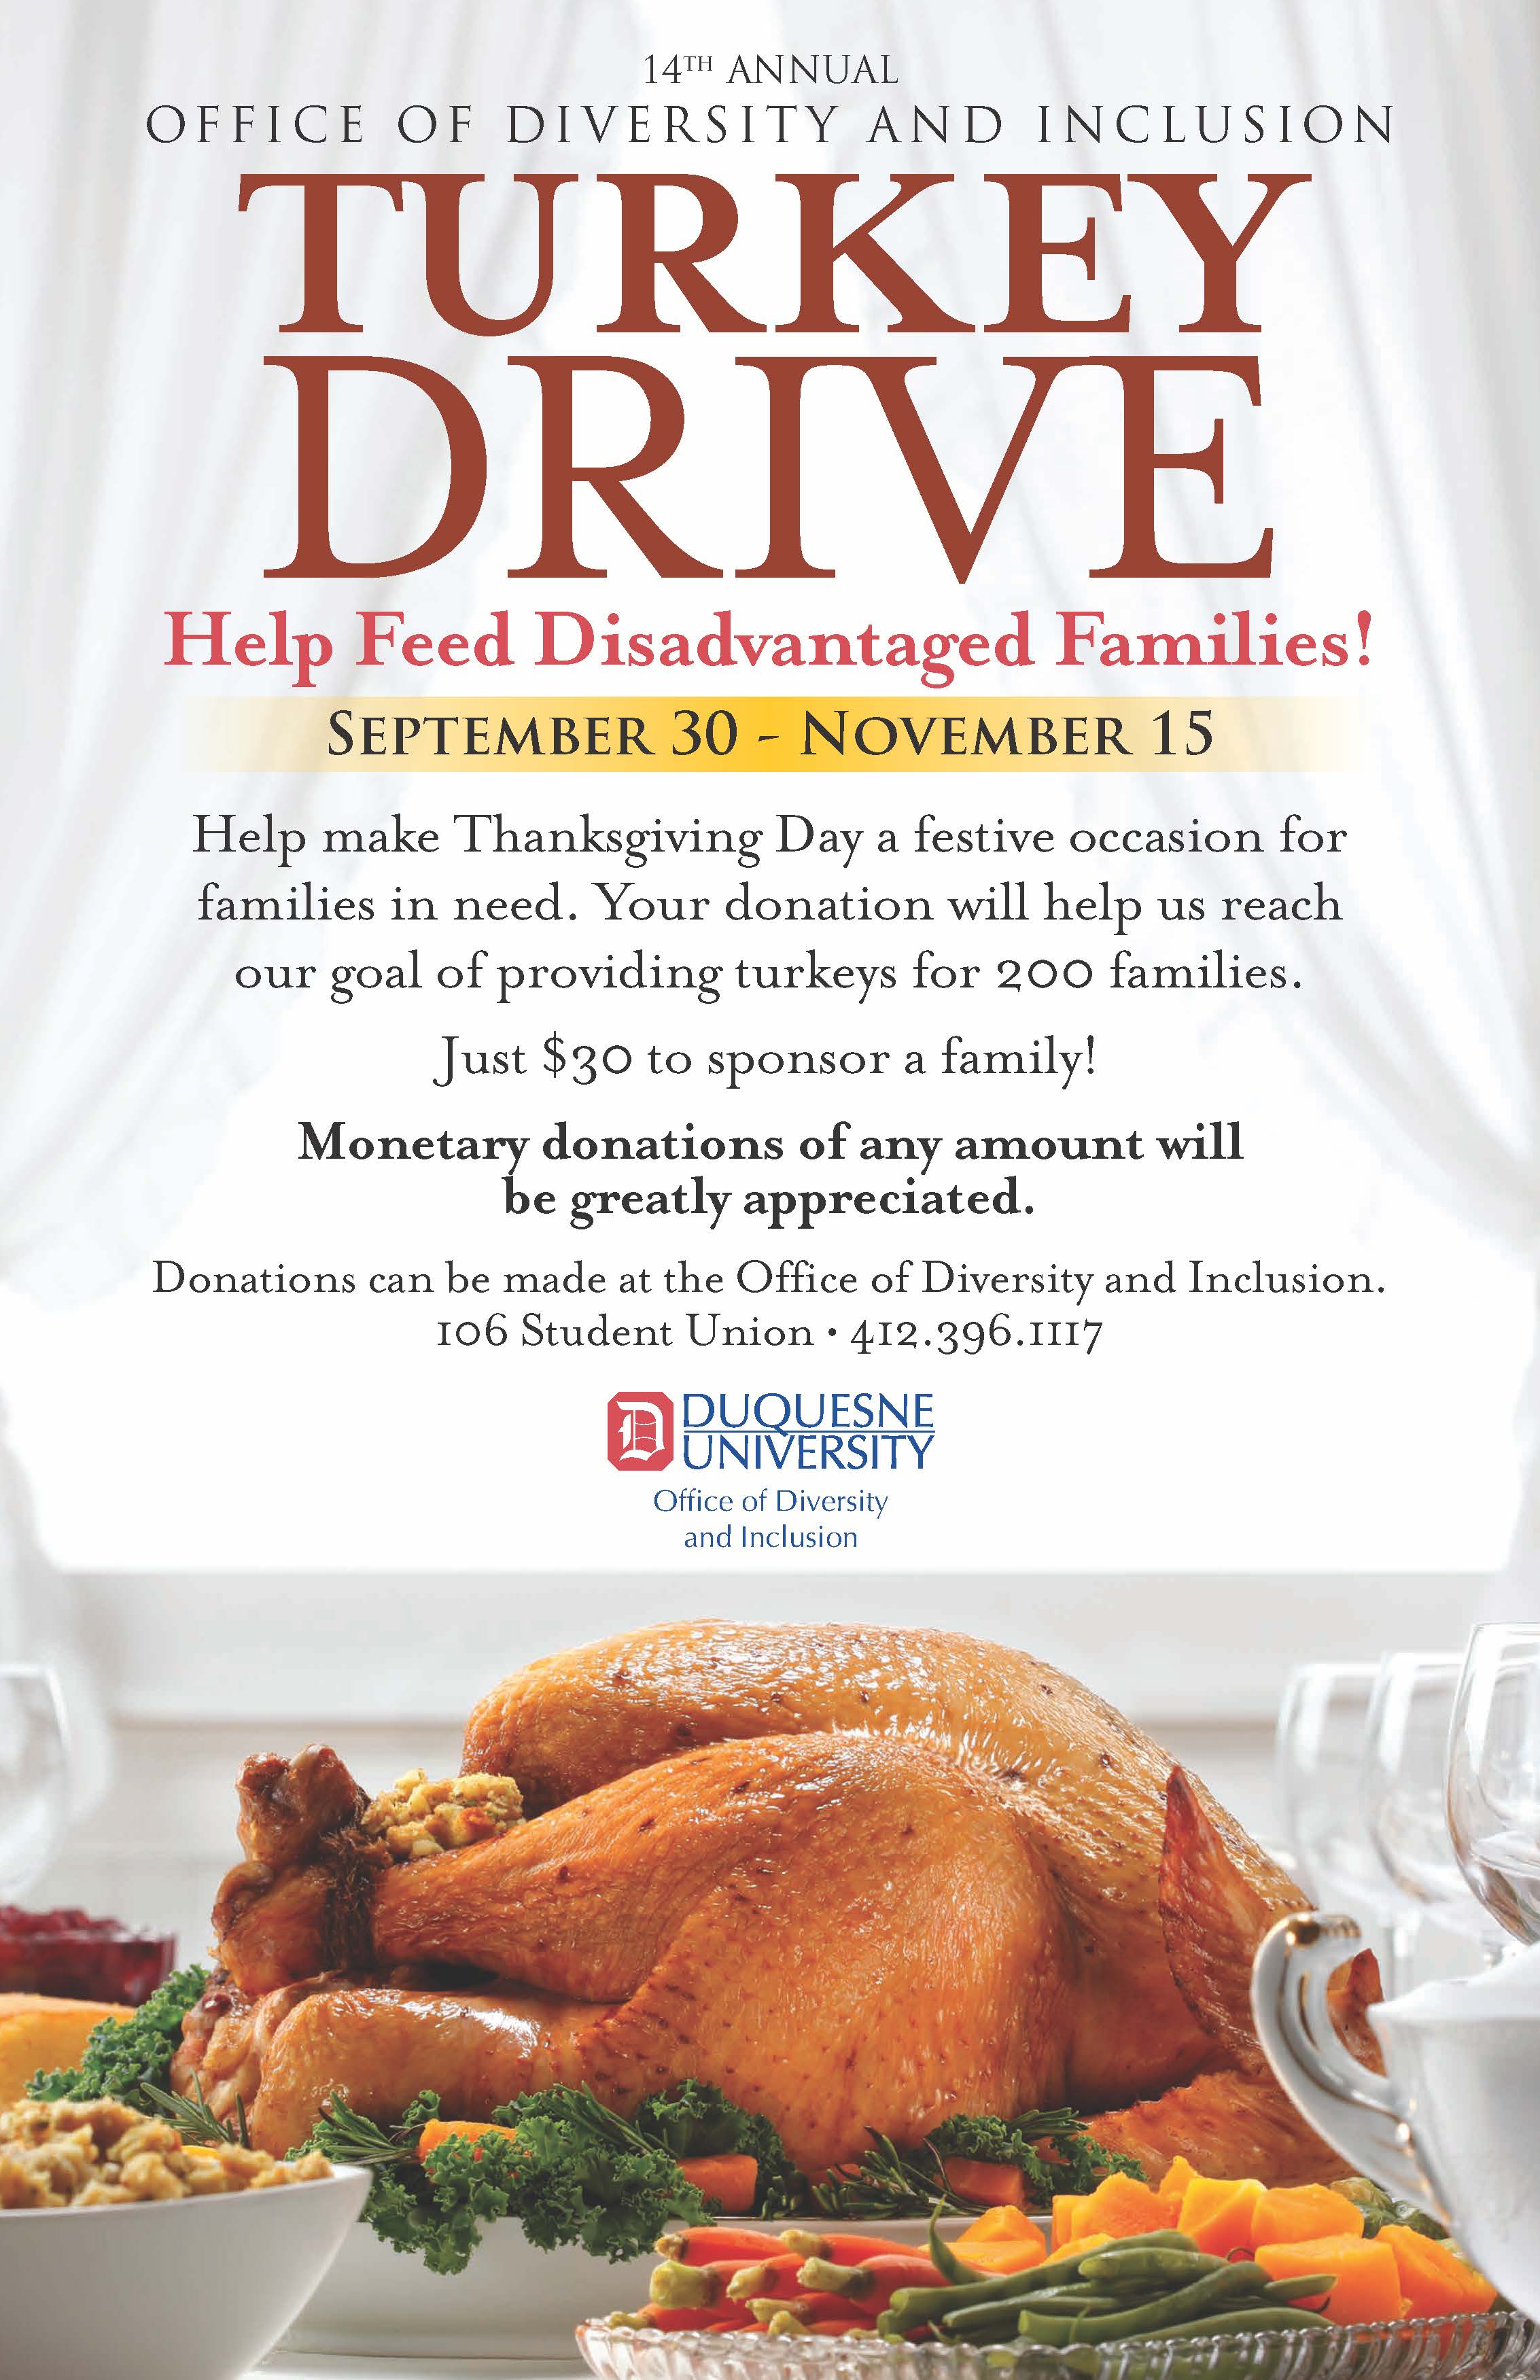 14th Annual ODI Turkey Drive Begins, Will Benefit Families in Need